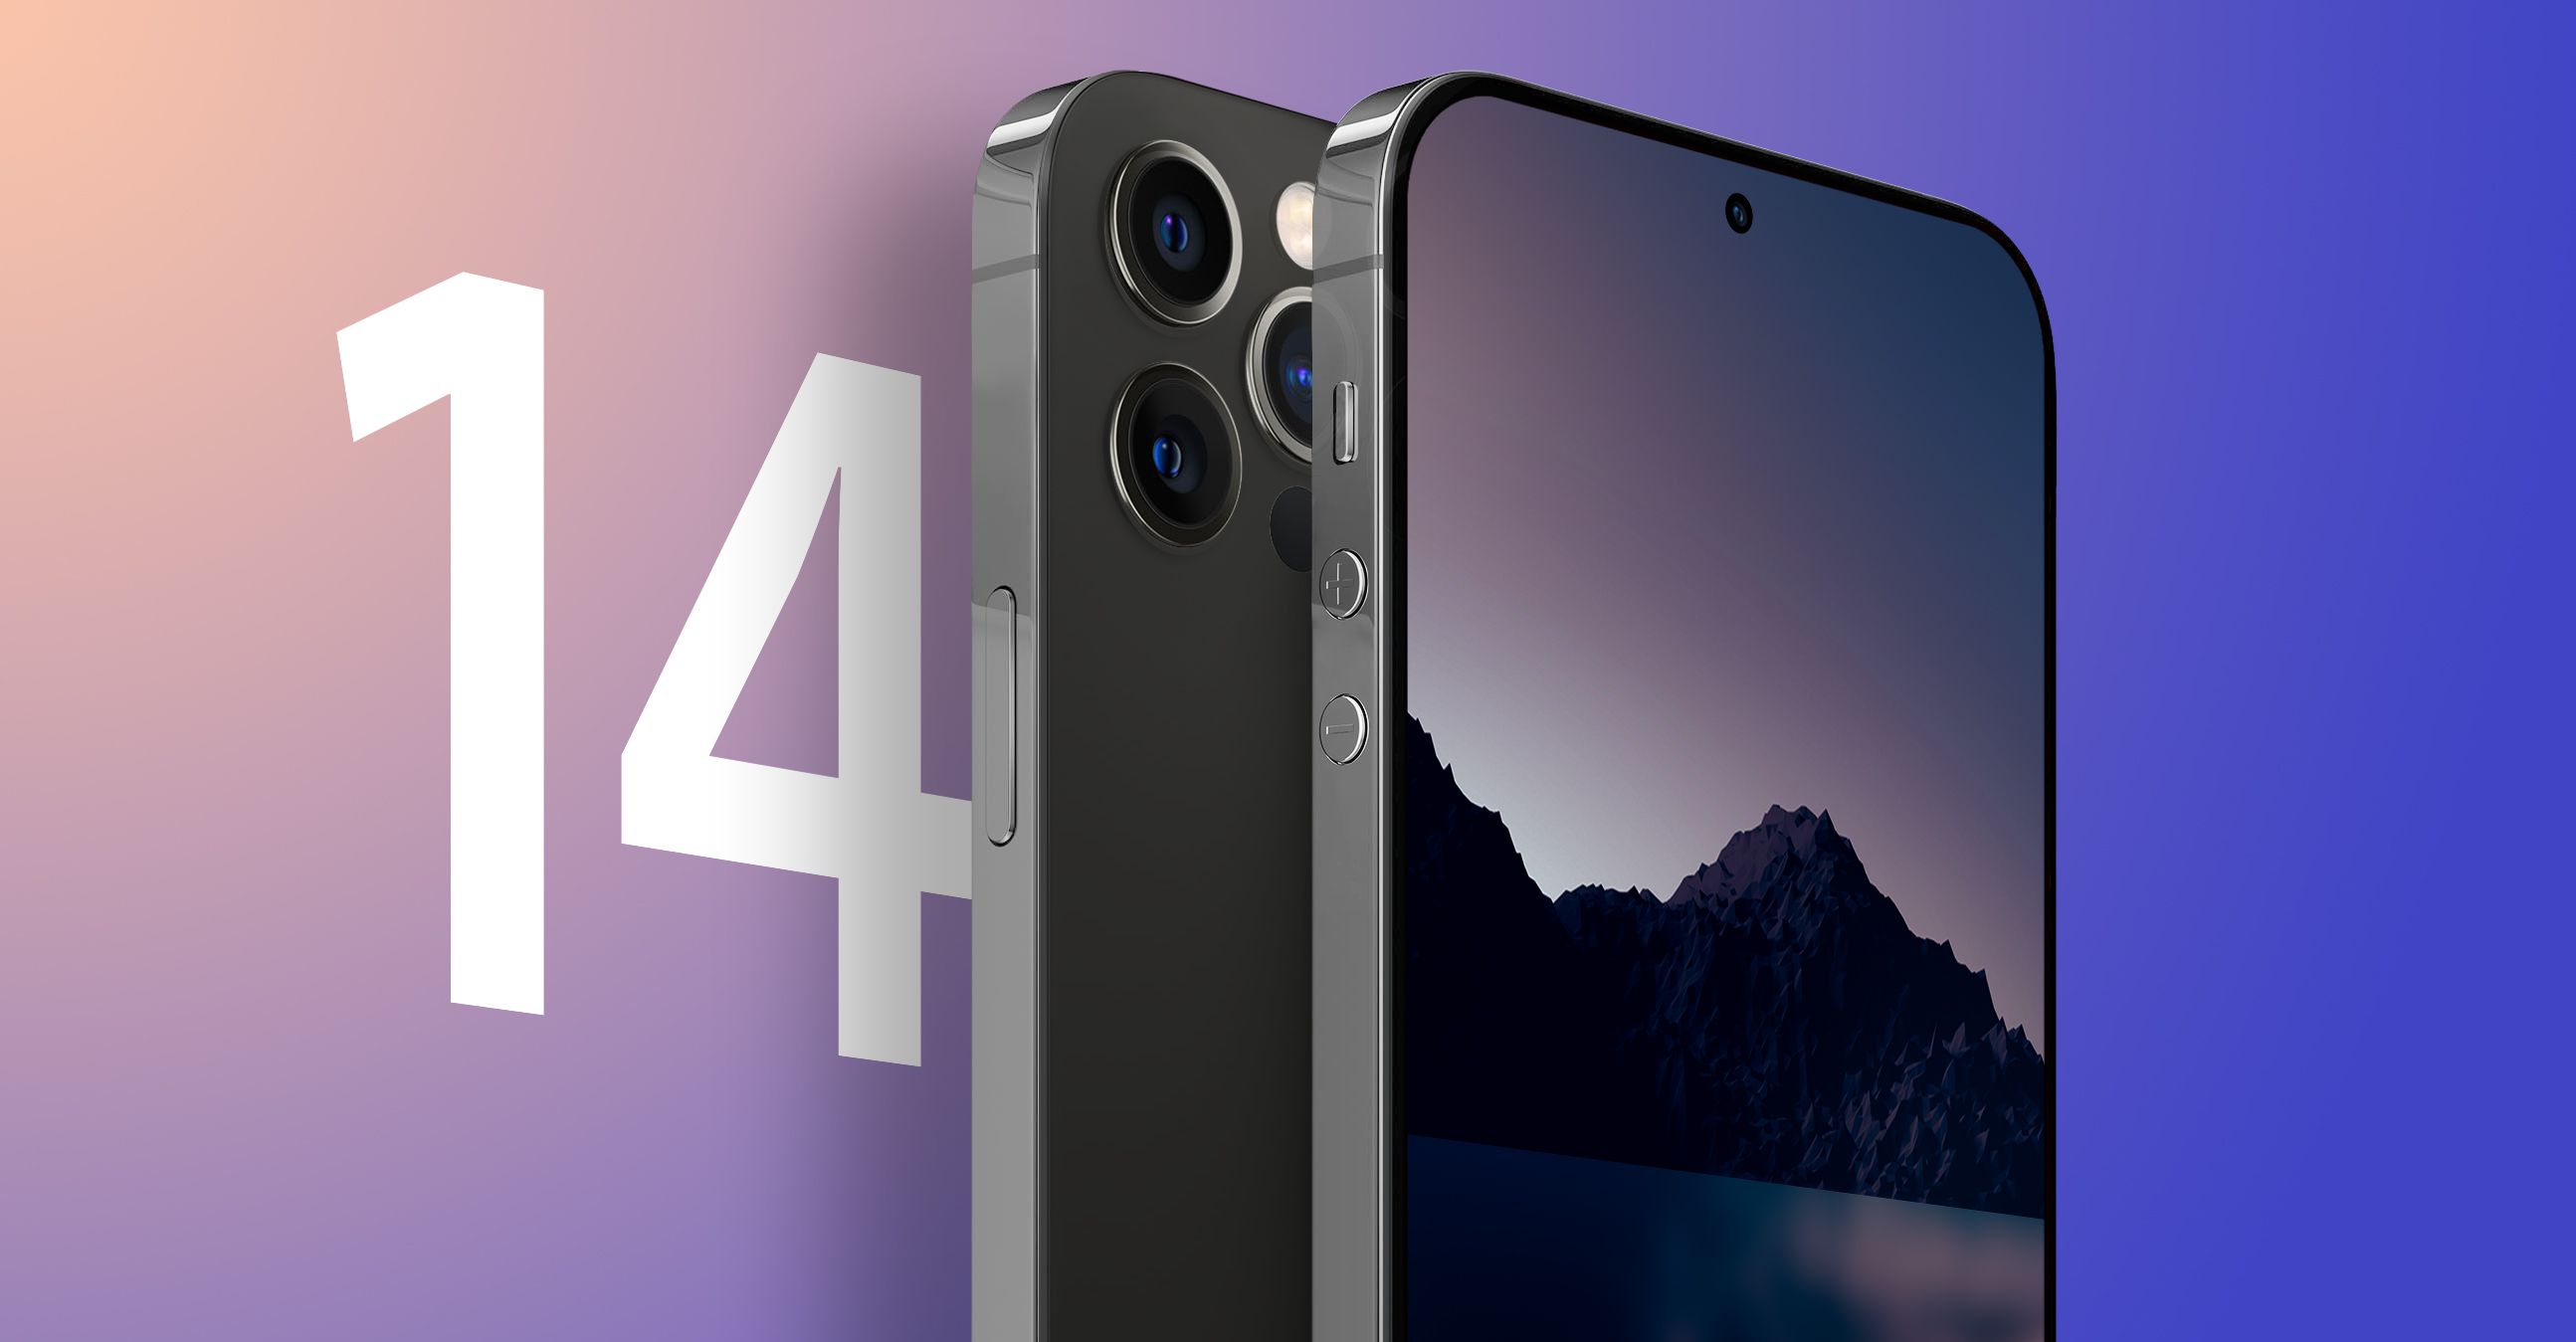 Kuo: iPhone 14 and Mixed Reality Headset to Feature Wi-Fi 6E